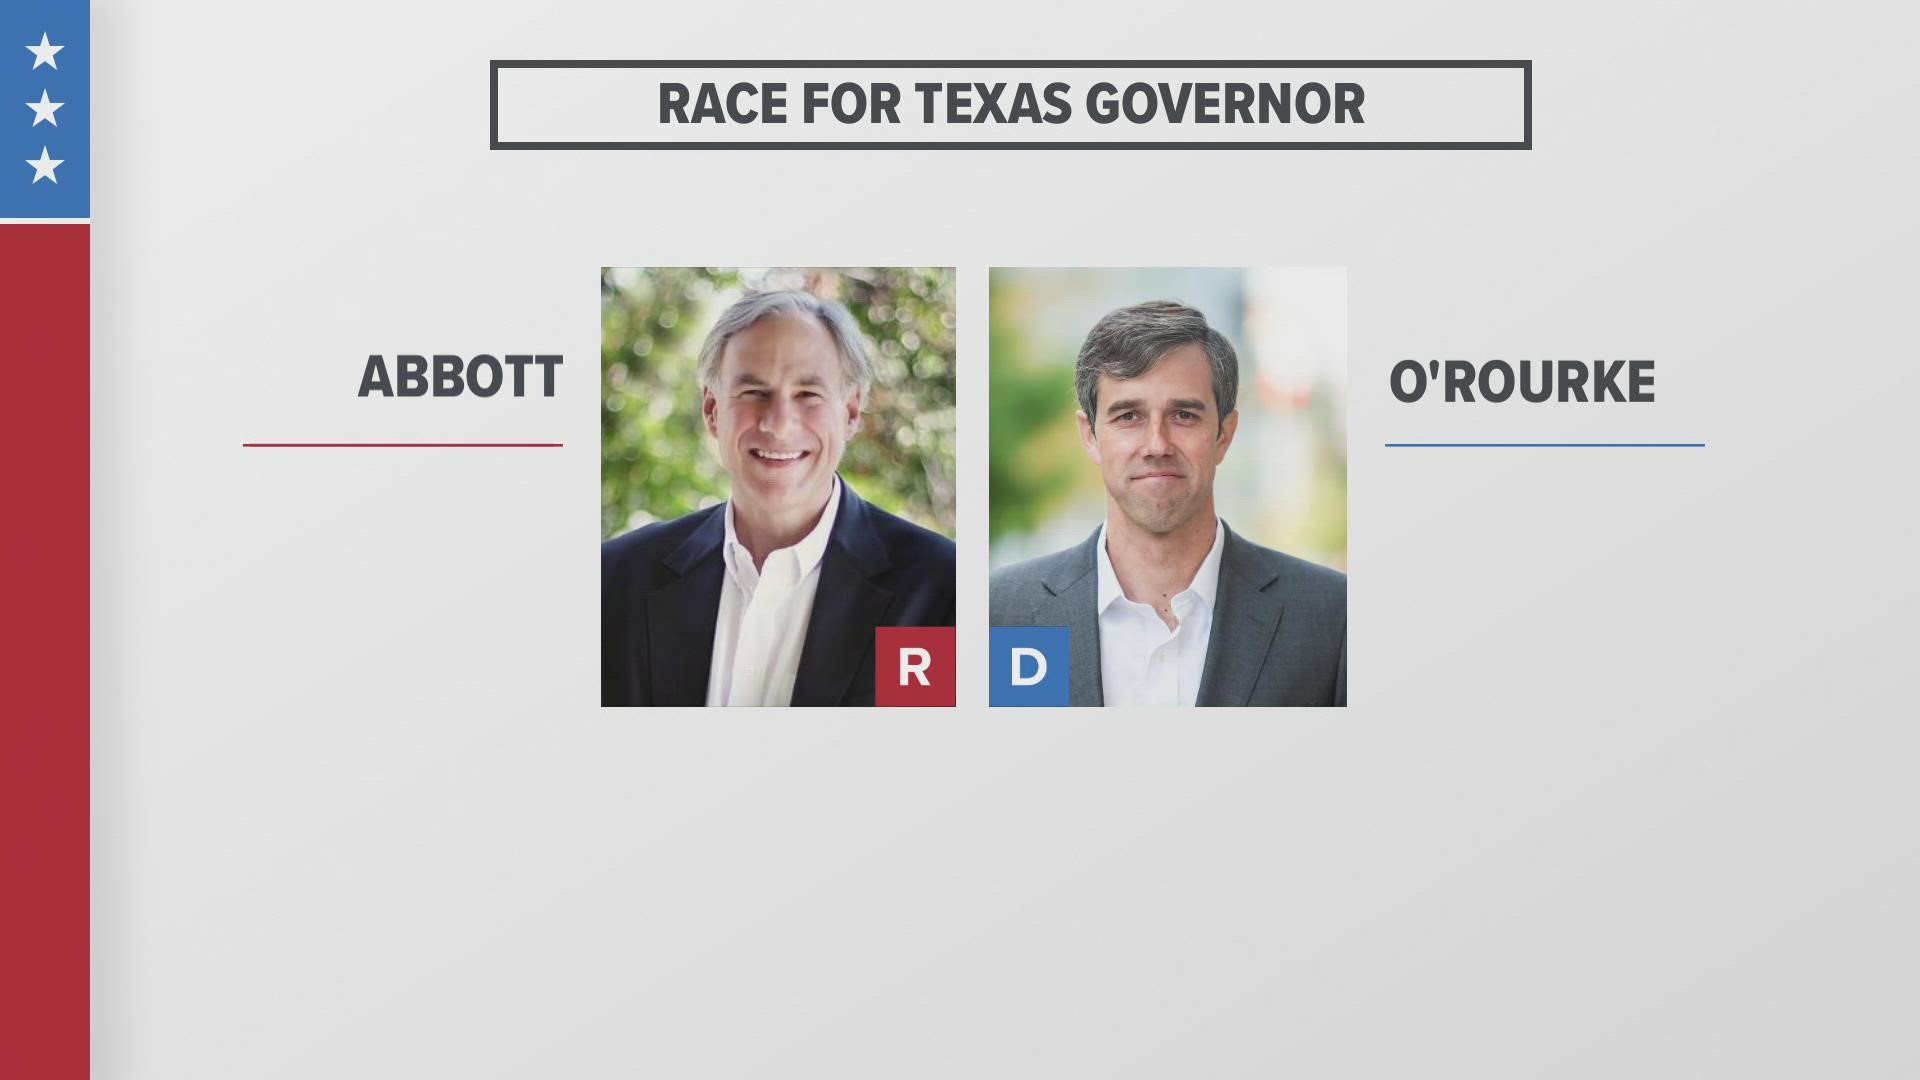 It’s the matchup most Texans expected. Incumbent Gov. Abbott and Beto O’Rourke have won their respective primaries and will now face off this November.